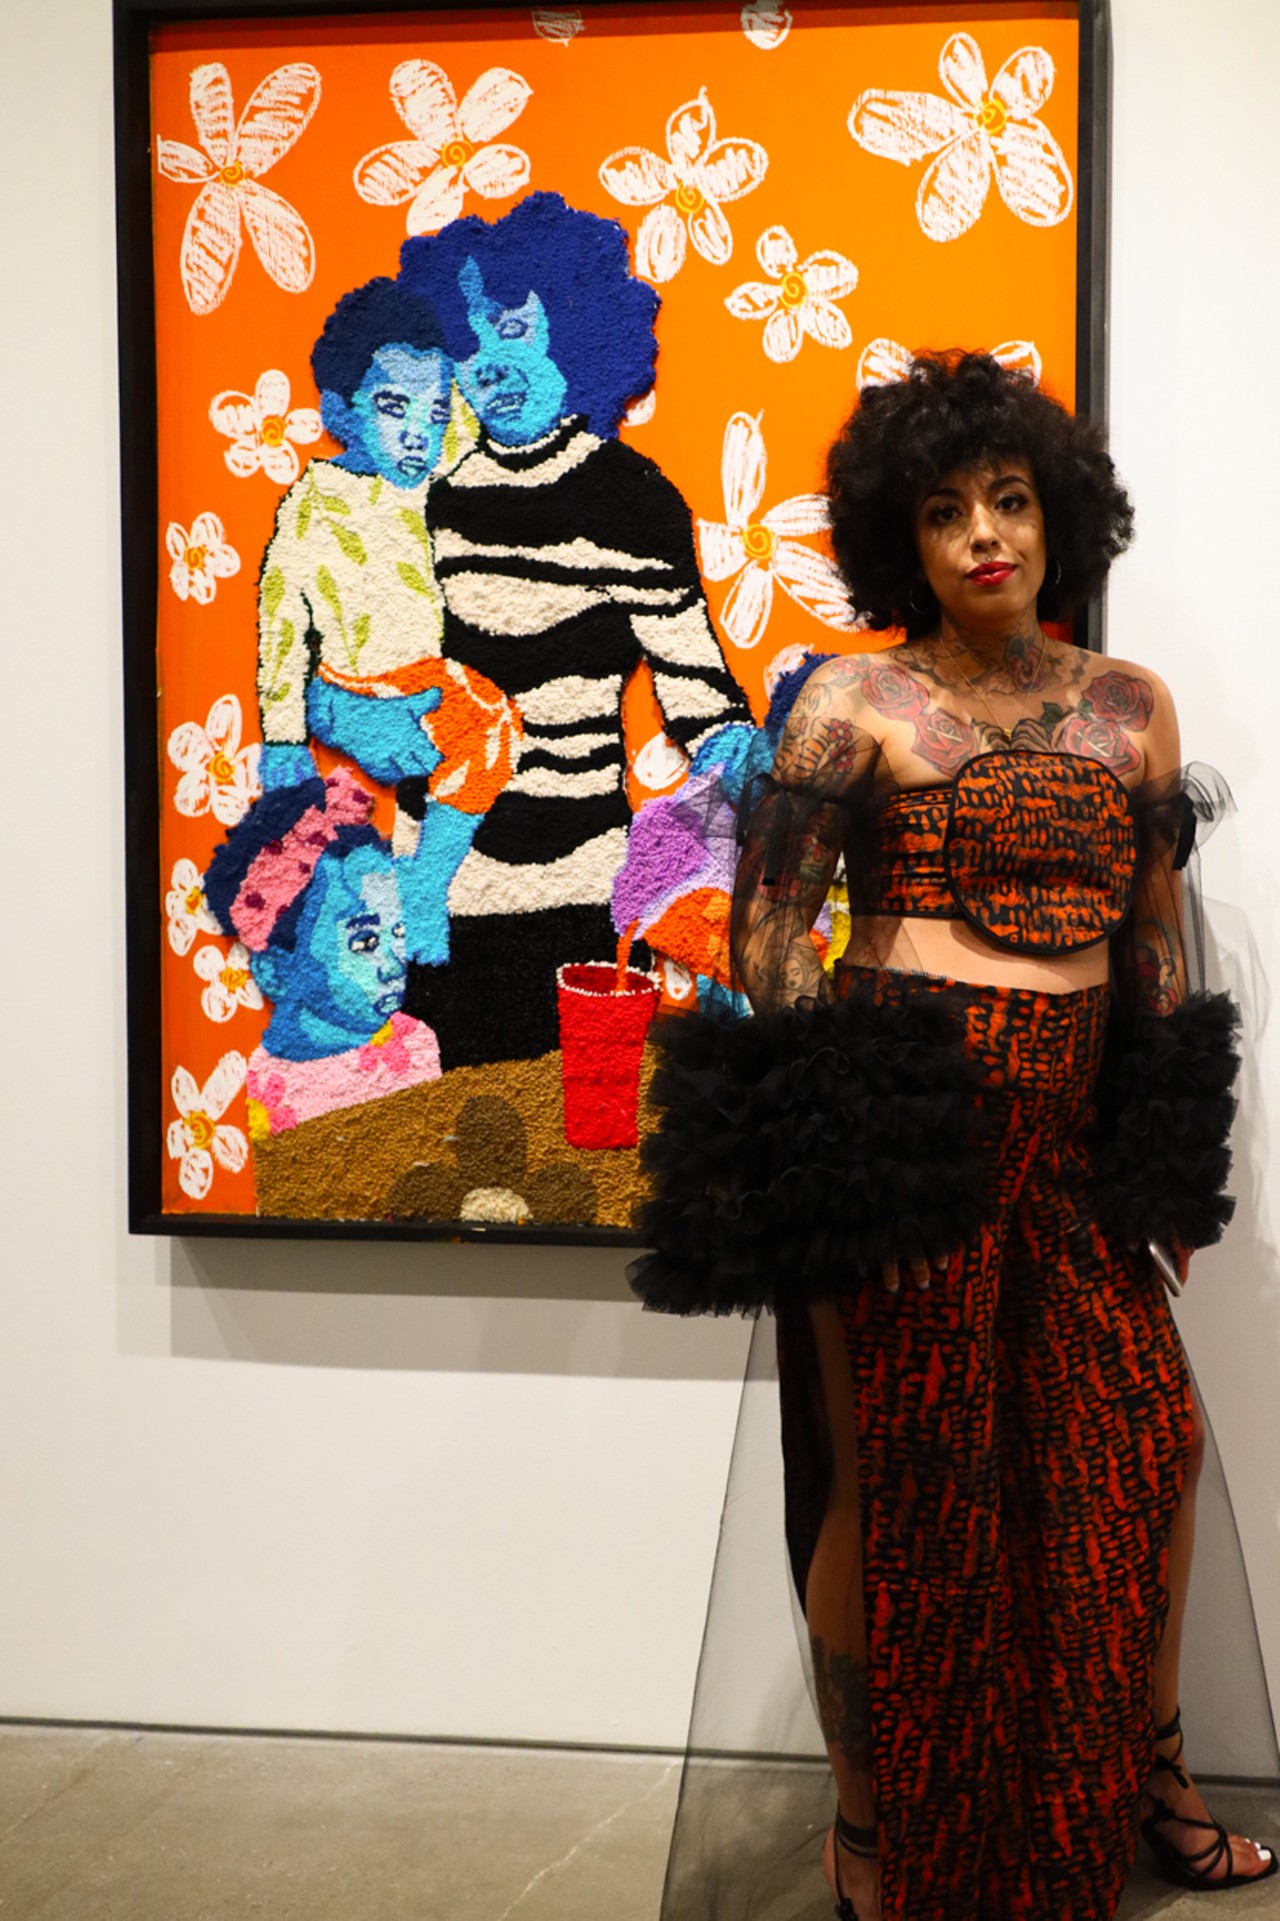 Photos from the "Color Me Boneface" and "Bloodline" Exhibition Openings at MoCA Cleveland